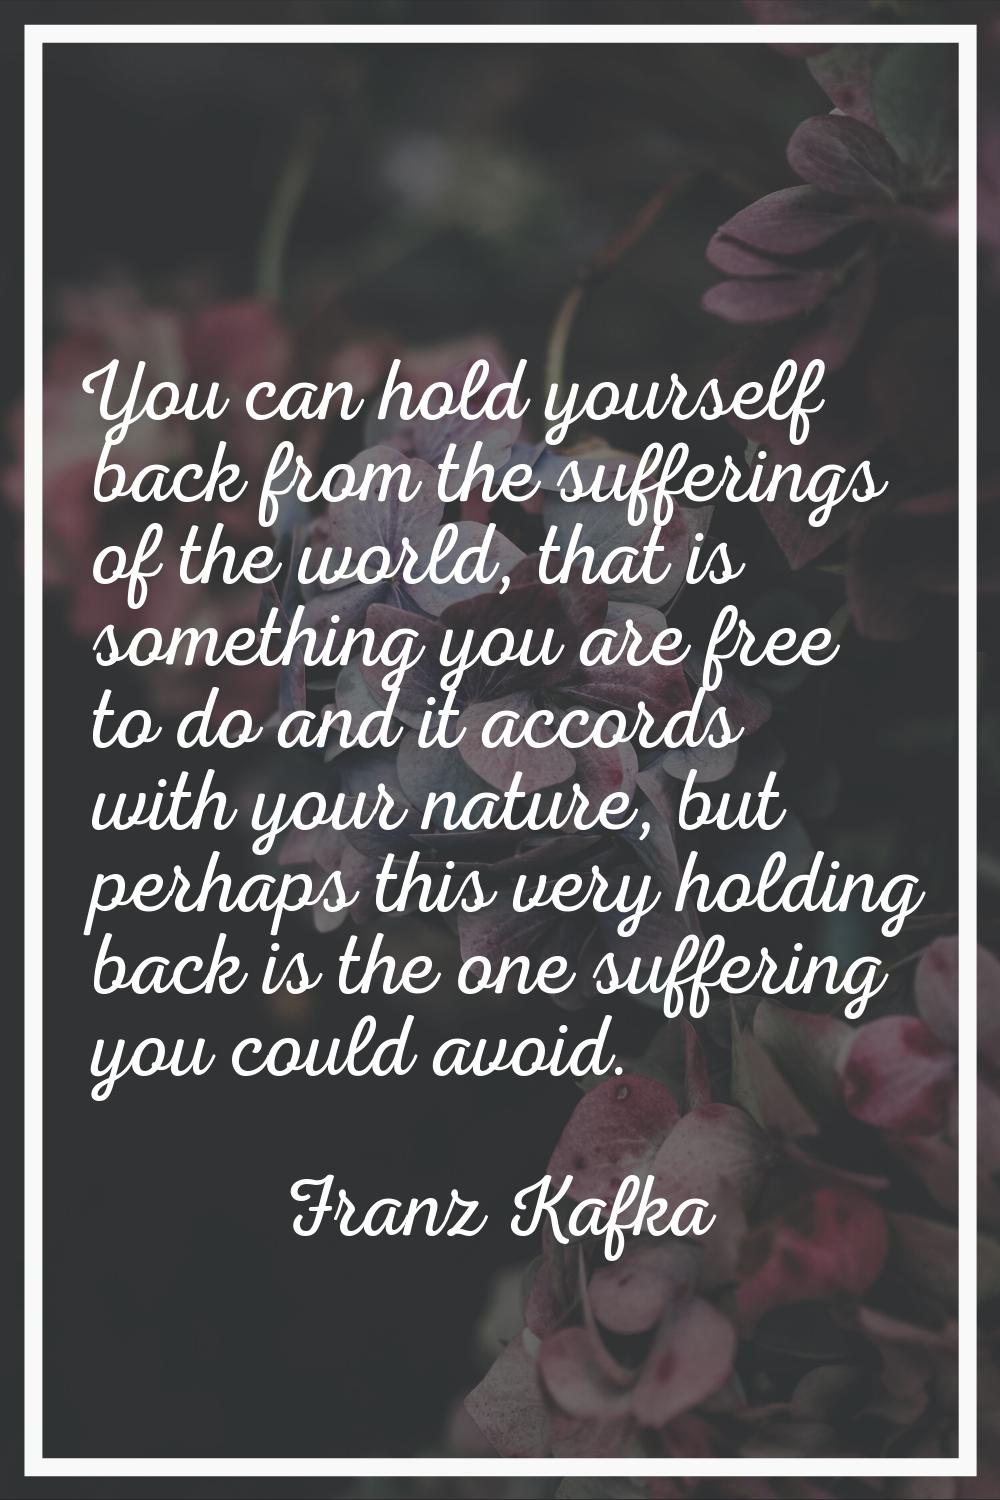 You can hold yourself back from the sufferings of the world, that is something you are free to do a